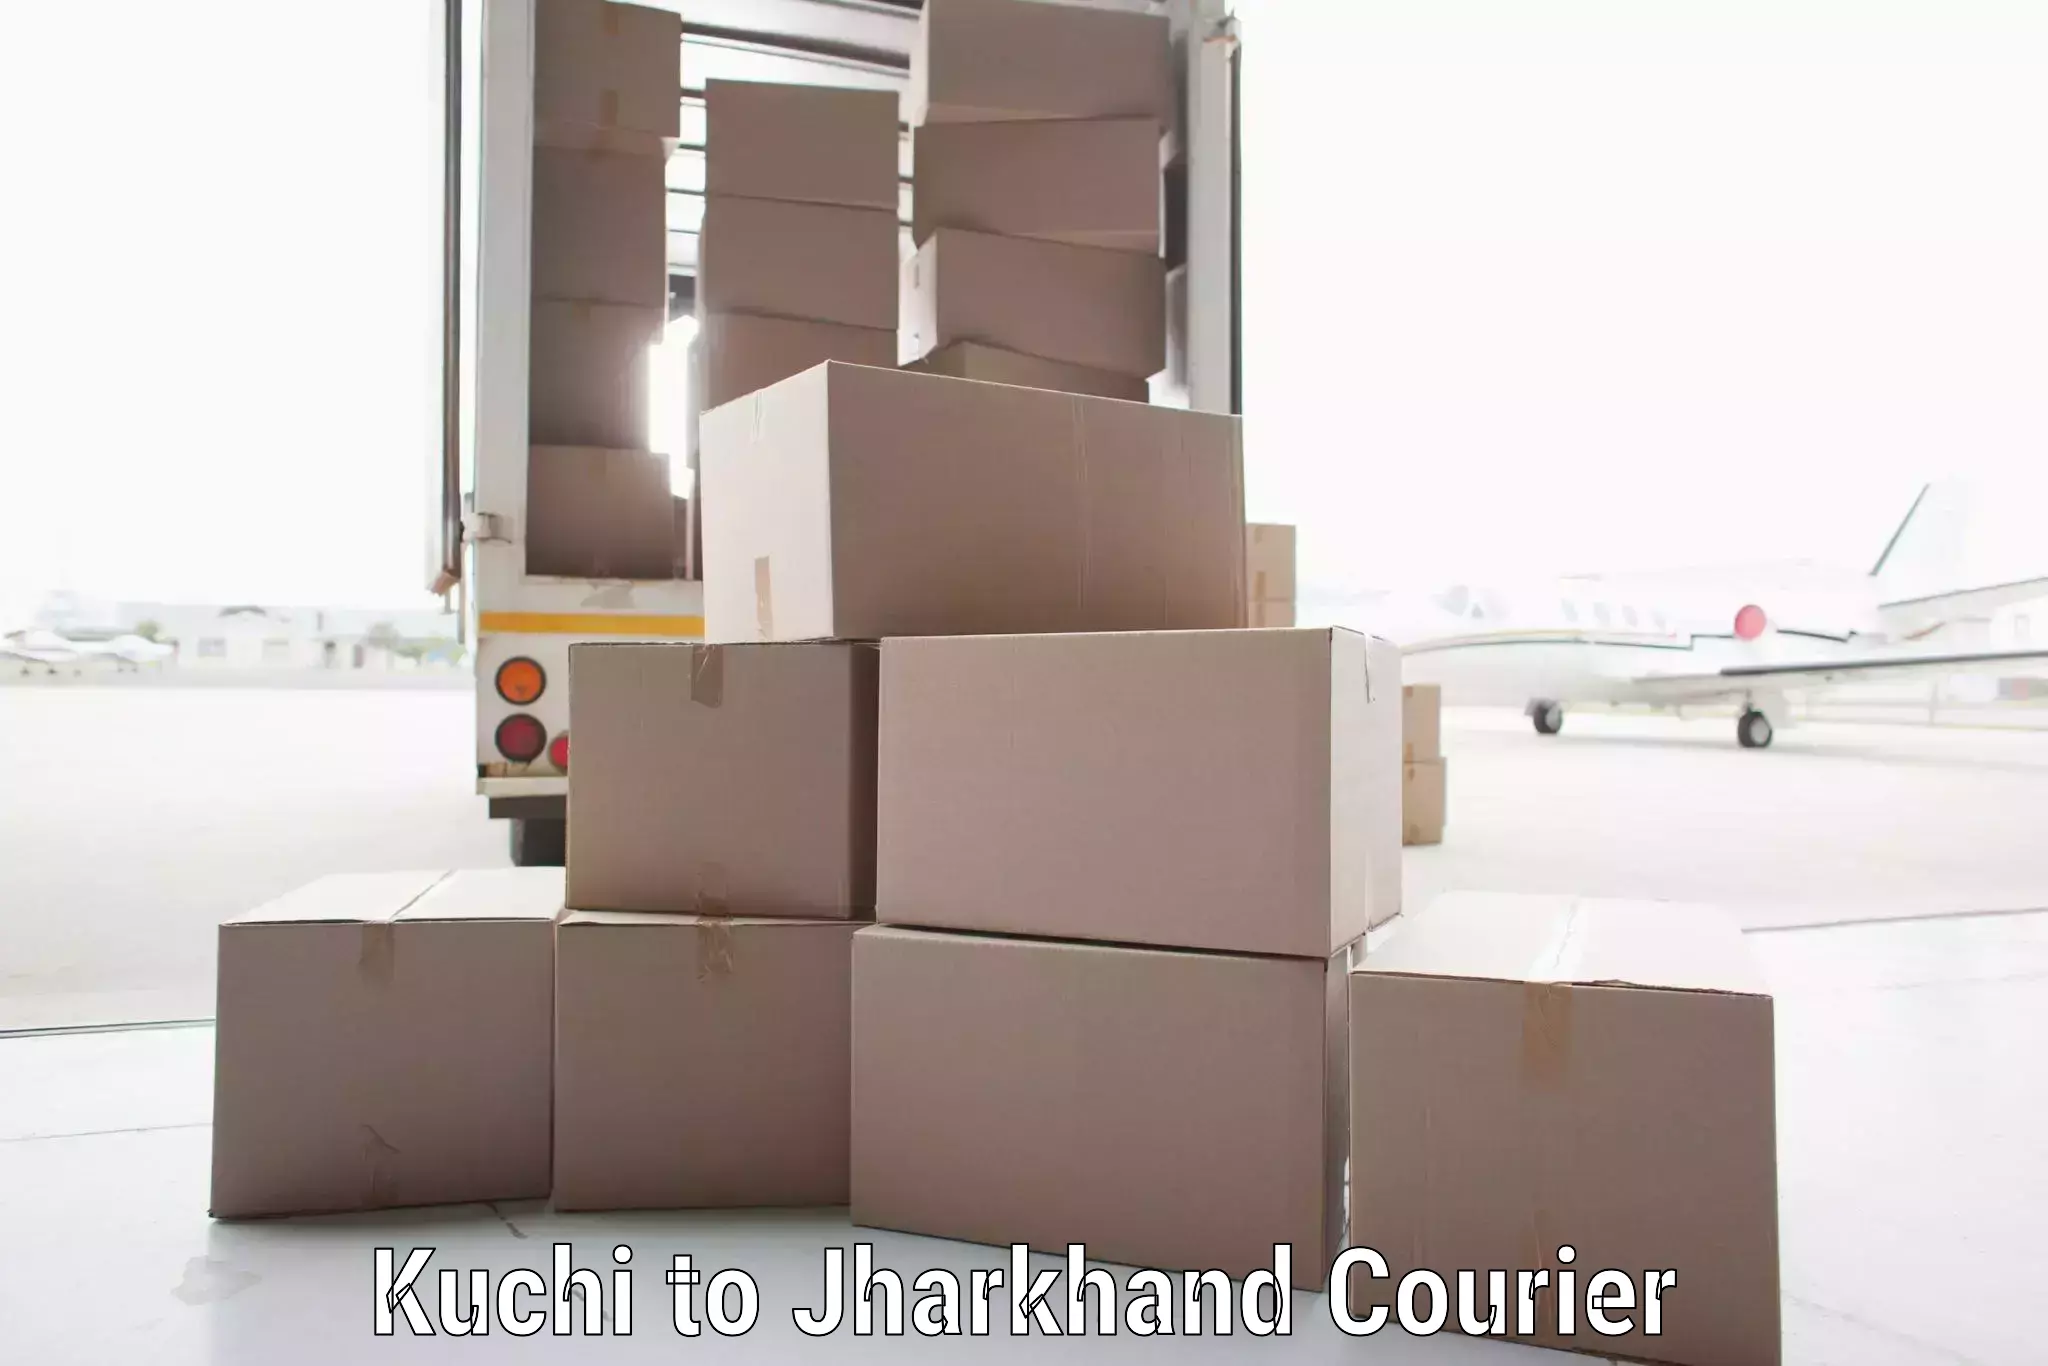 Reliable freight solutions Kuchi to Jharia